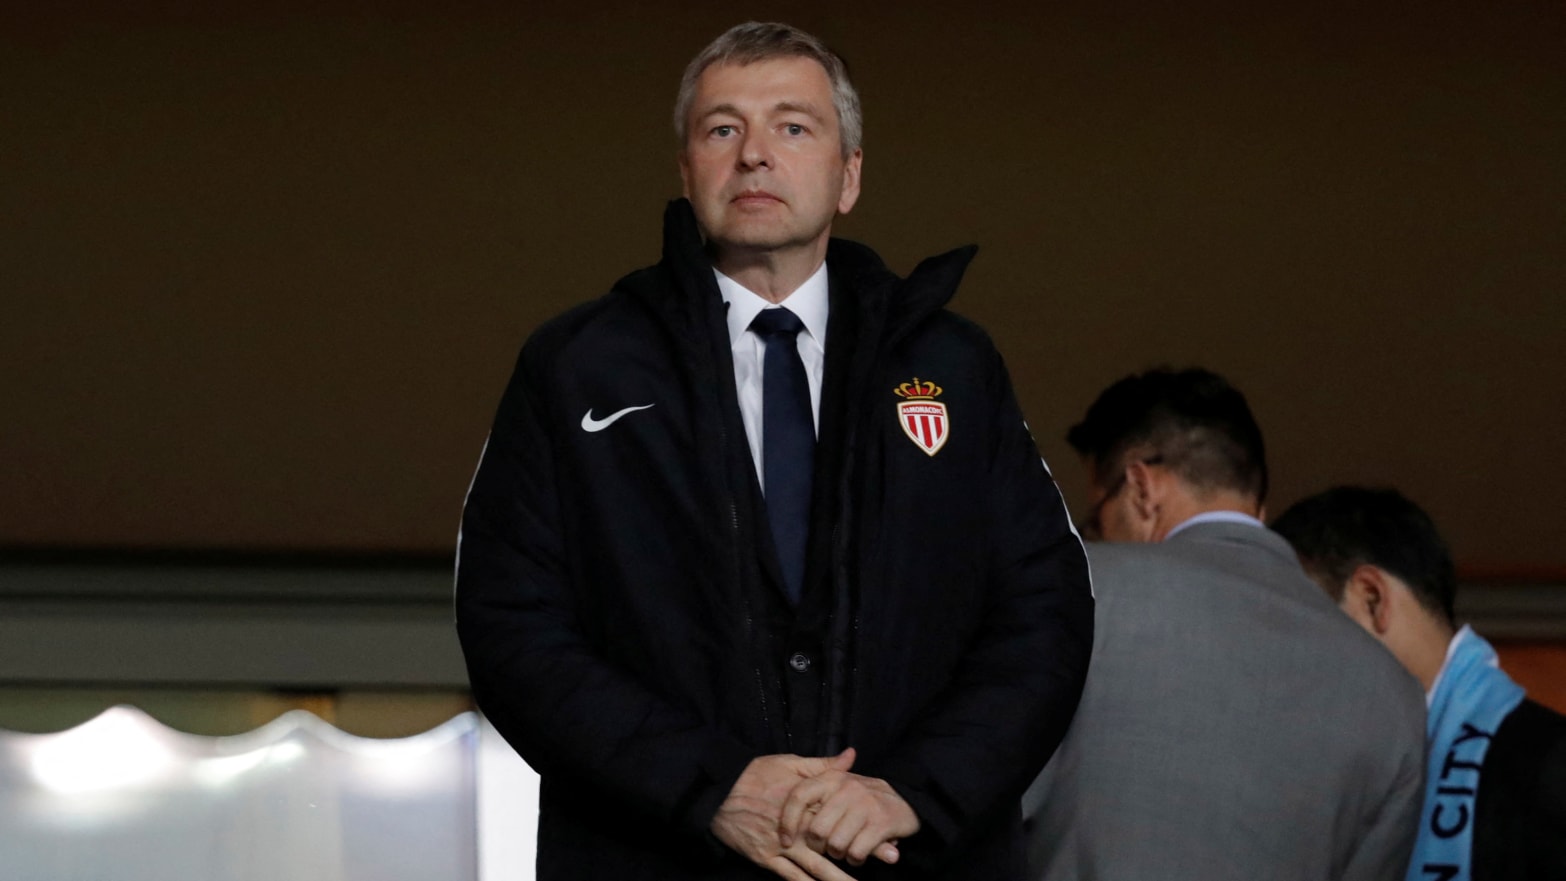 Dmitry Rybolovlev stands in a suite during a Champions League soccer match.